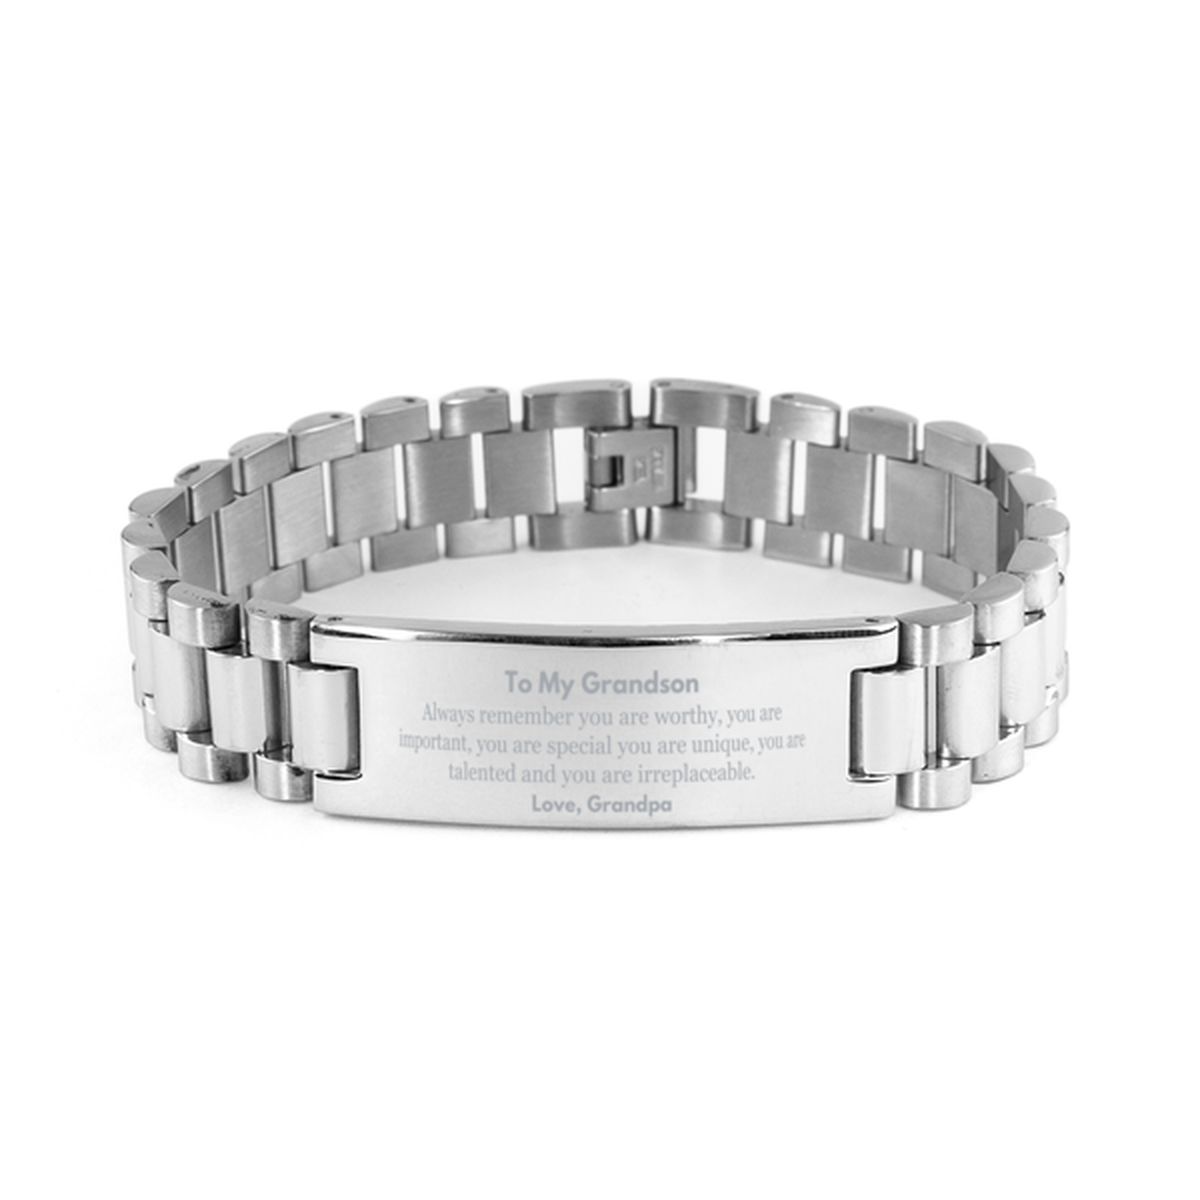 Grandson Birthday Gifts from Grandpa, Inspirational Ladder Stainless Steel Bracelet for Grandson Christmas Graduation Gifts for Grandson Always remember you are worthy, you are important. Love, Grandpa